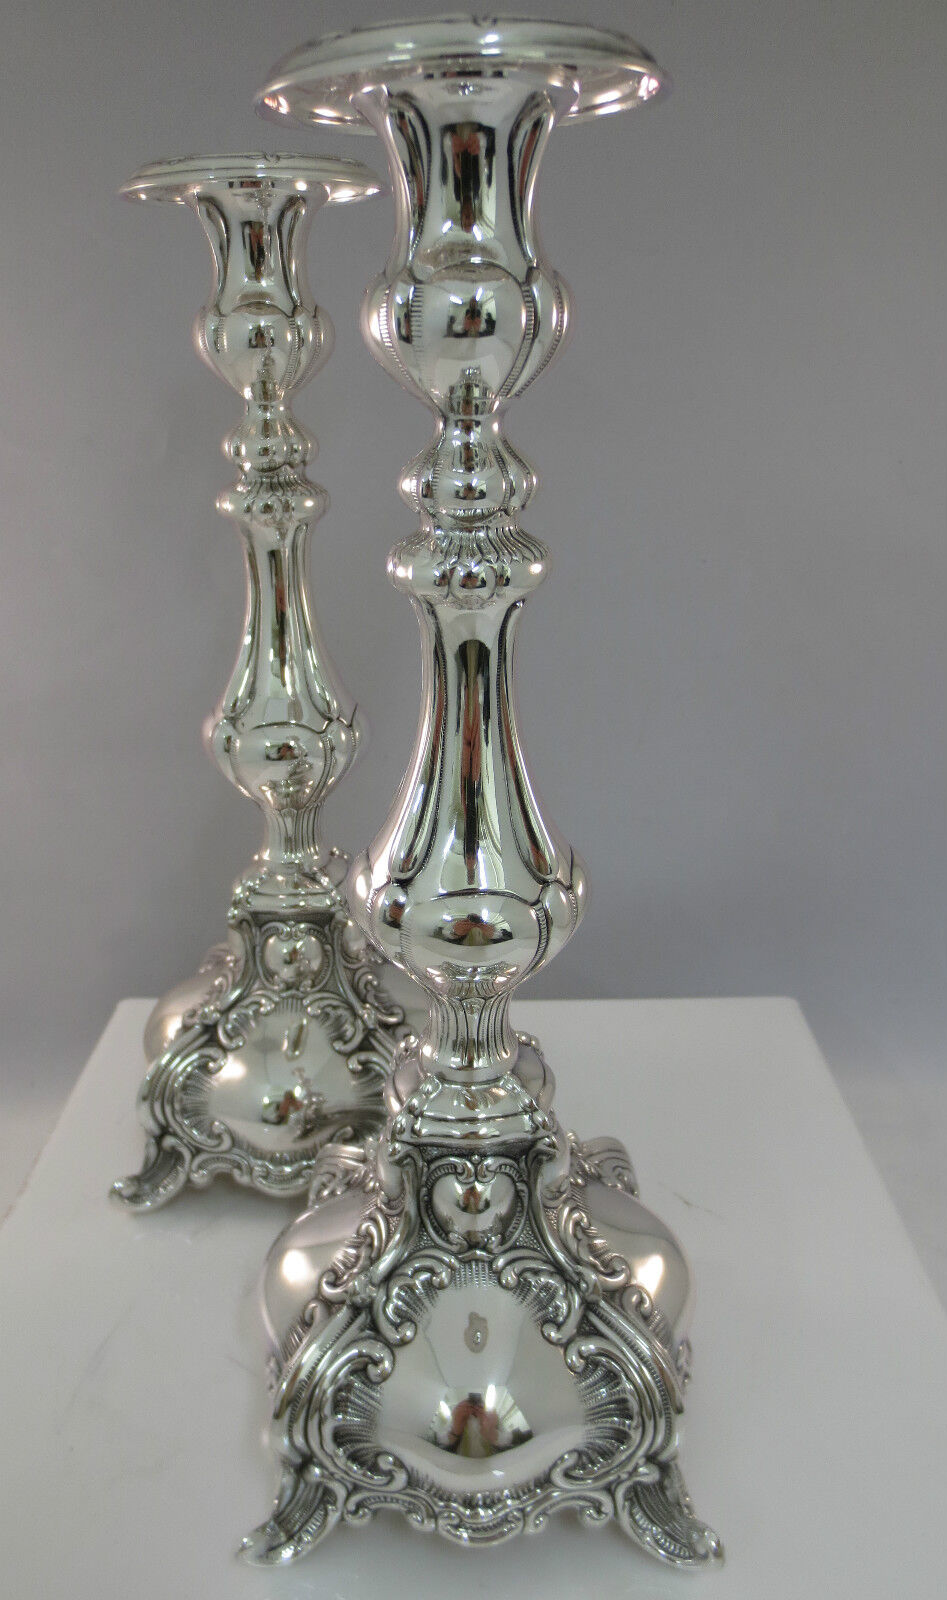  STERLING SILVER CANDLESTICKS 925 SET OF 2 TRADITIONAL BEAUTIFUL DESIGN MOTIF10\